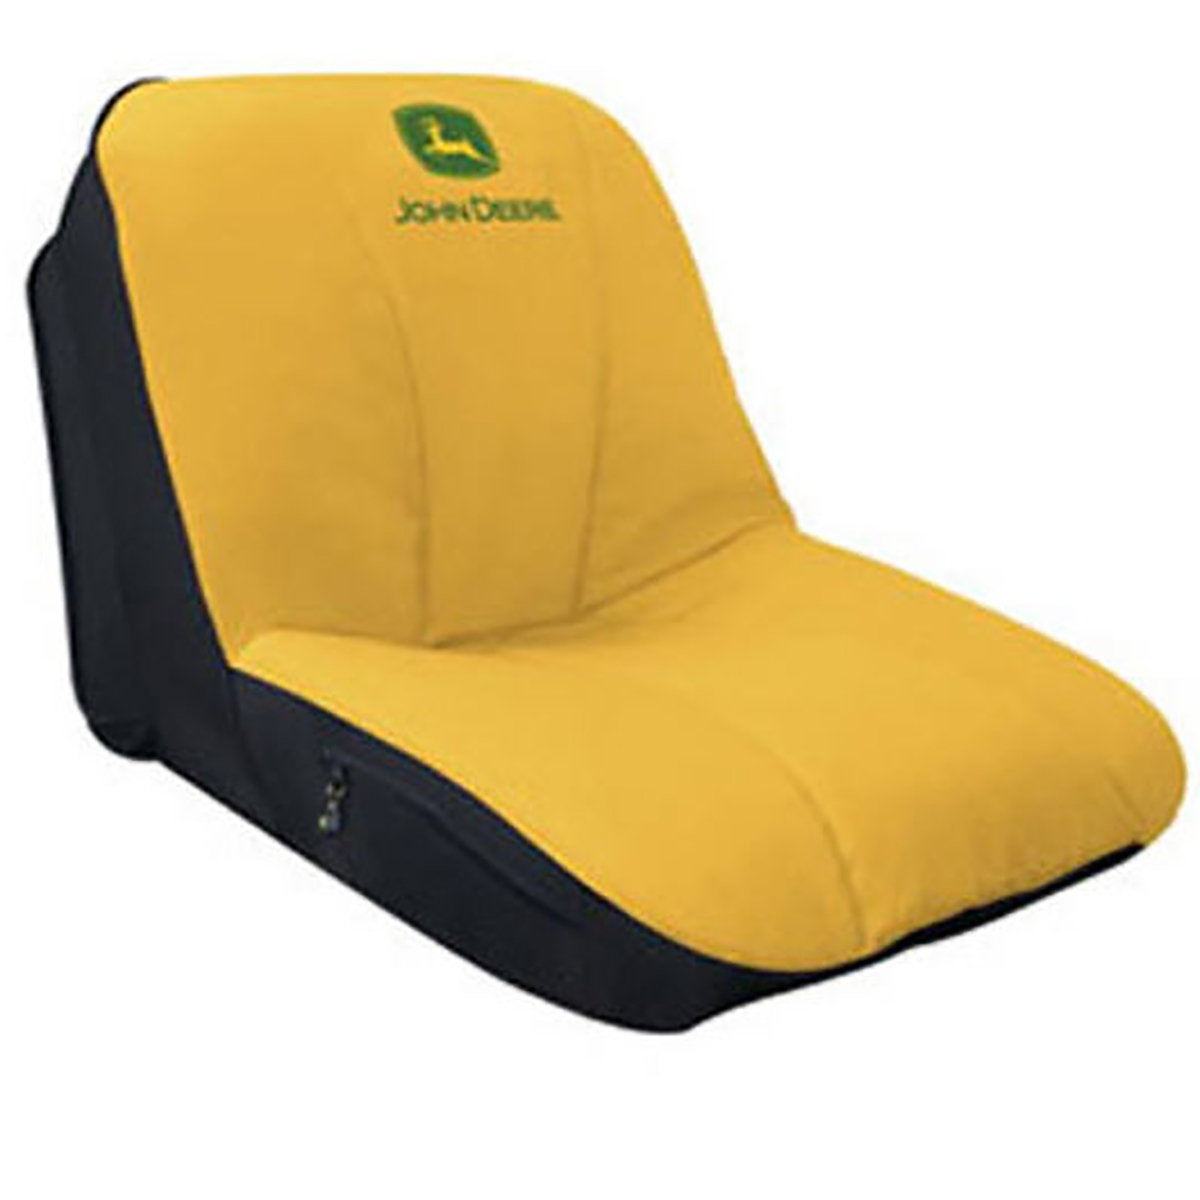 Deluxe Large Seat Cover for Gators and Riding Lawn Equipment